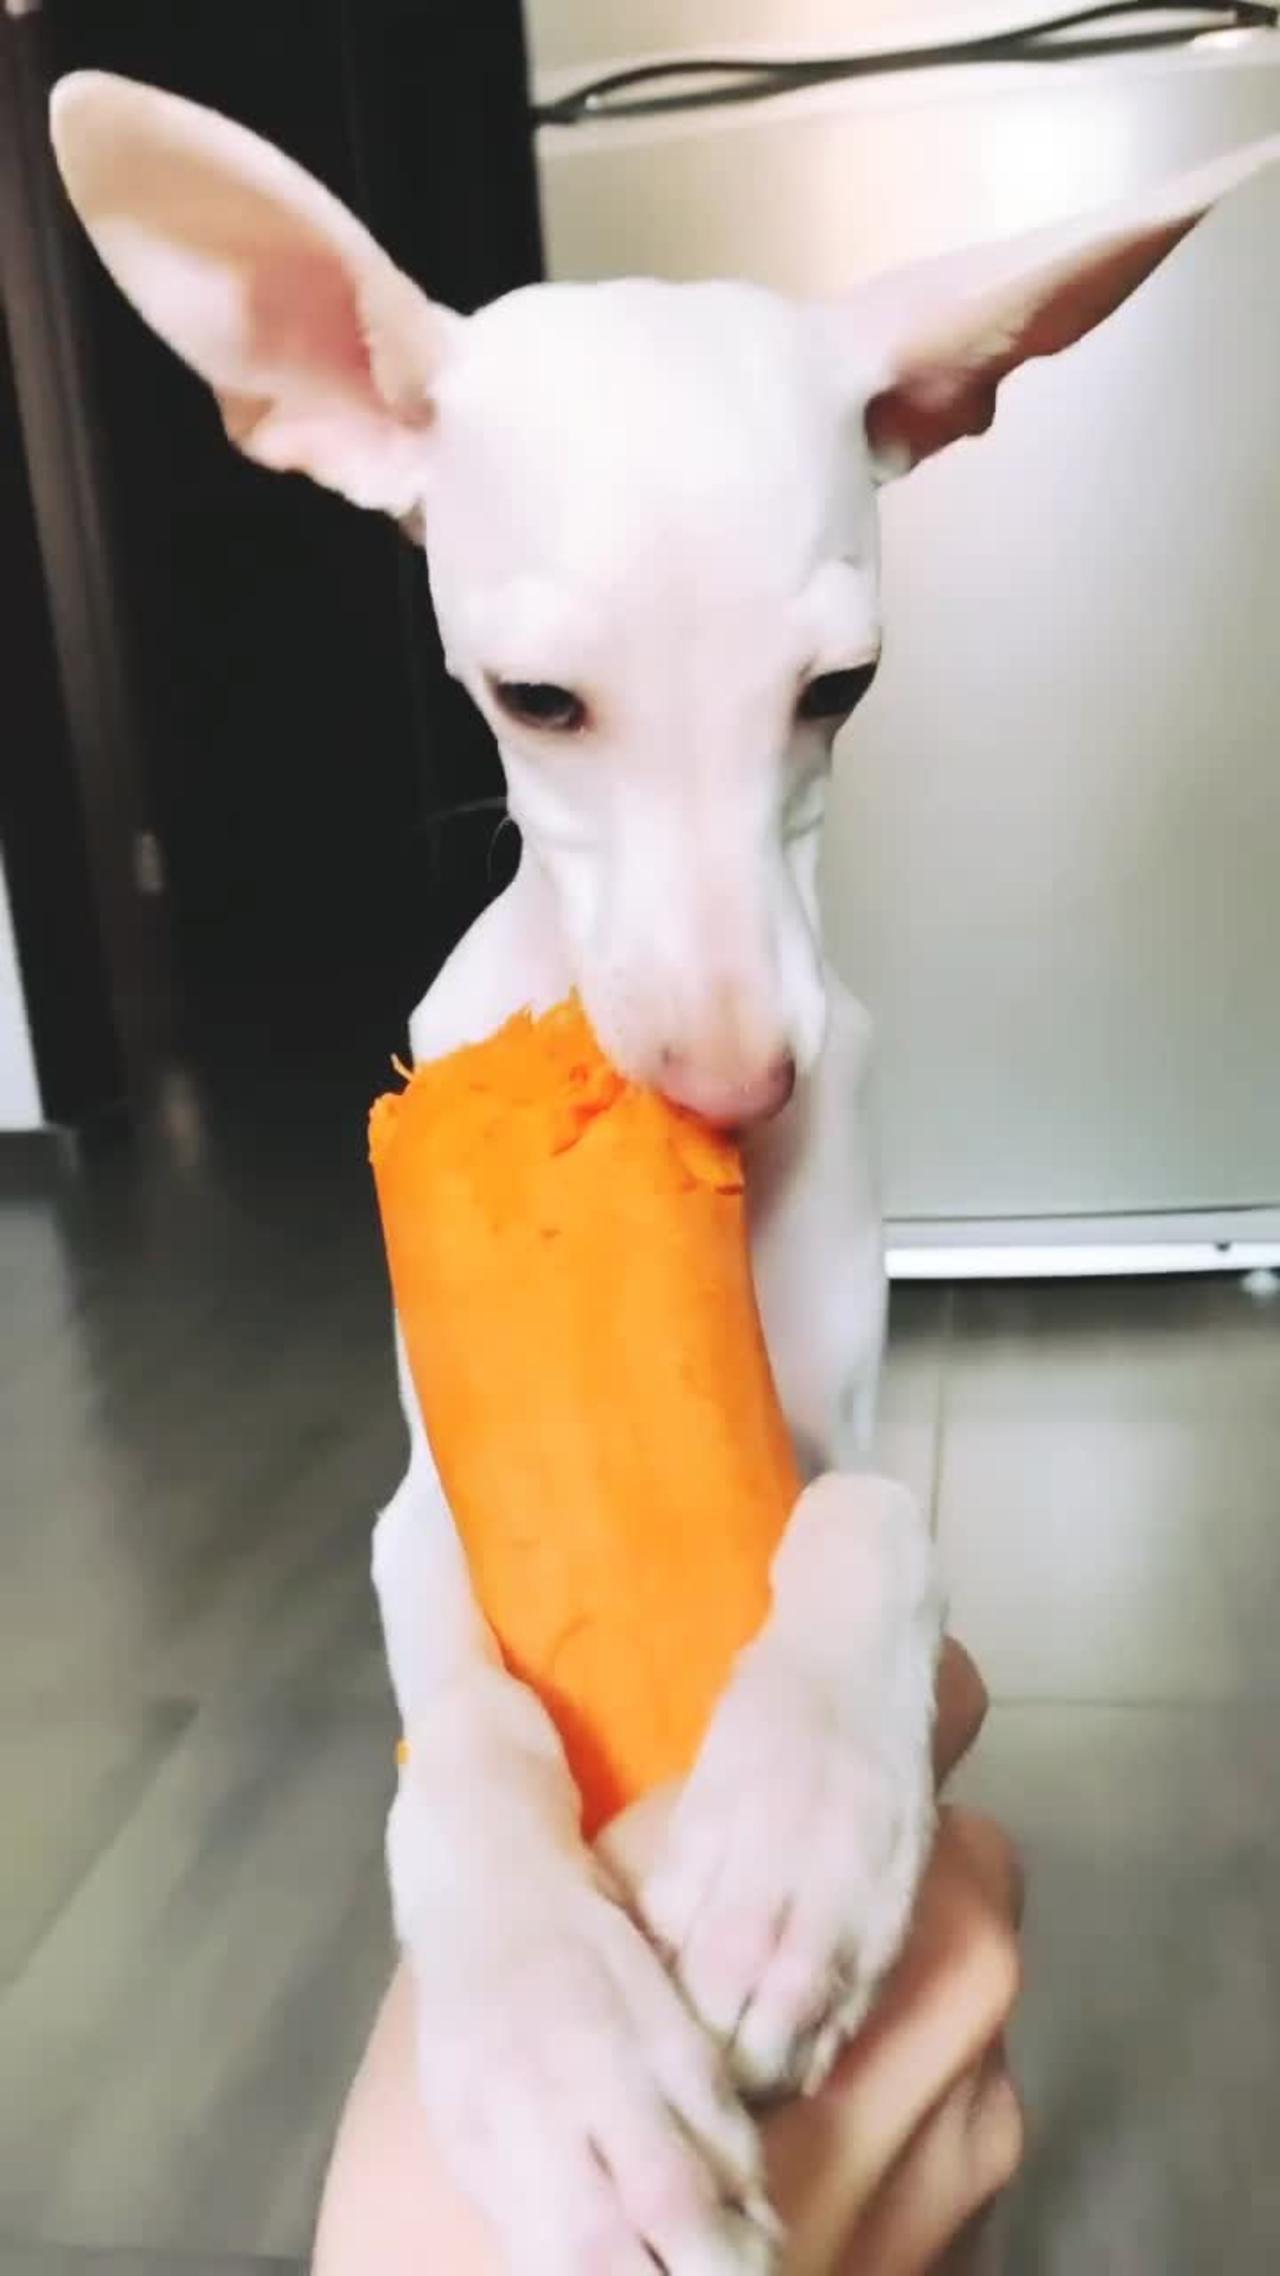 Cutie DOG EAT ICE-CREAM WITH THEIR HANDS AMAZING VIDEO